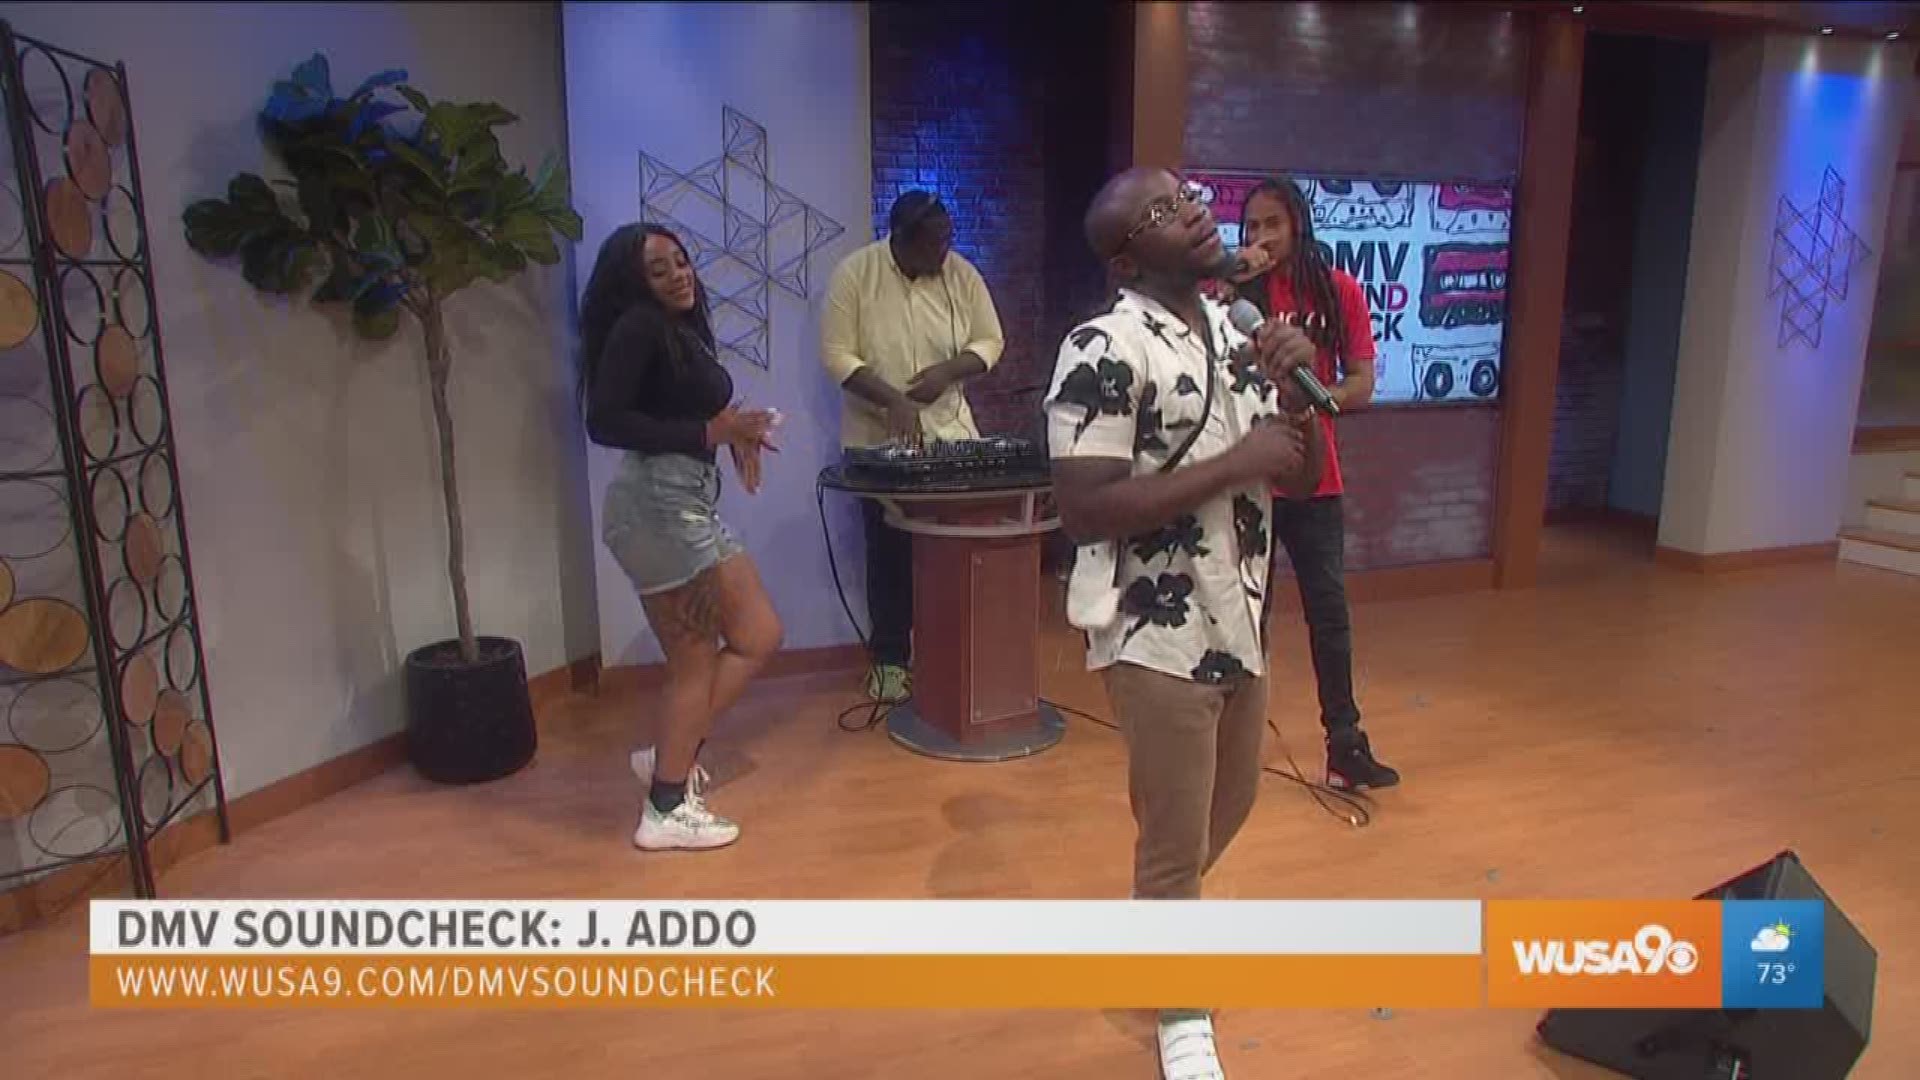 The following segment is sponsored by DC OCTFME. In this week's DMV Soundcheck we feature afrobeat artist J. Addo.